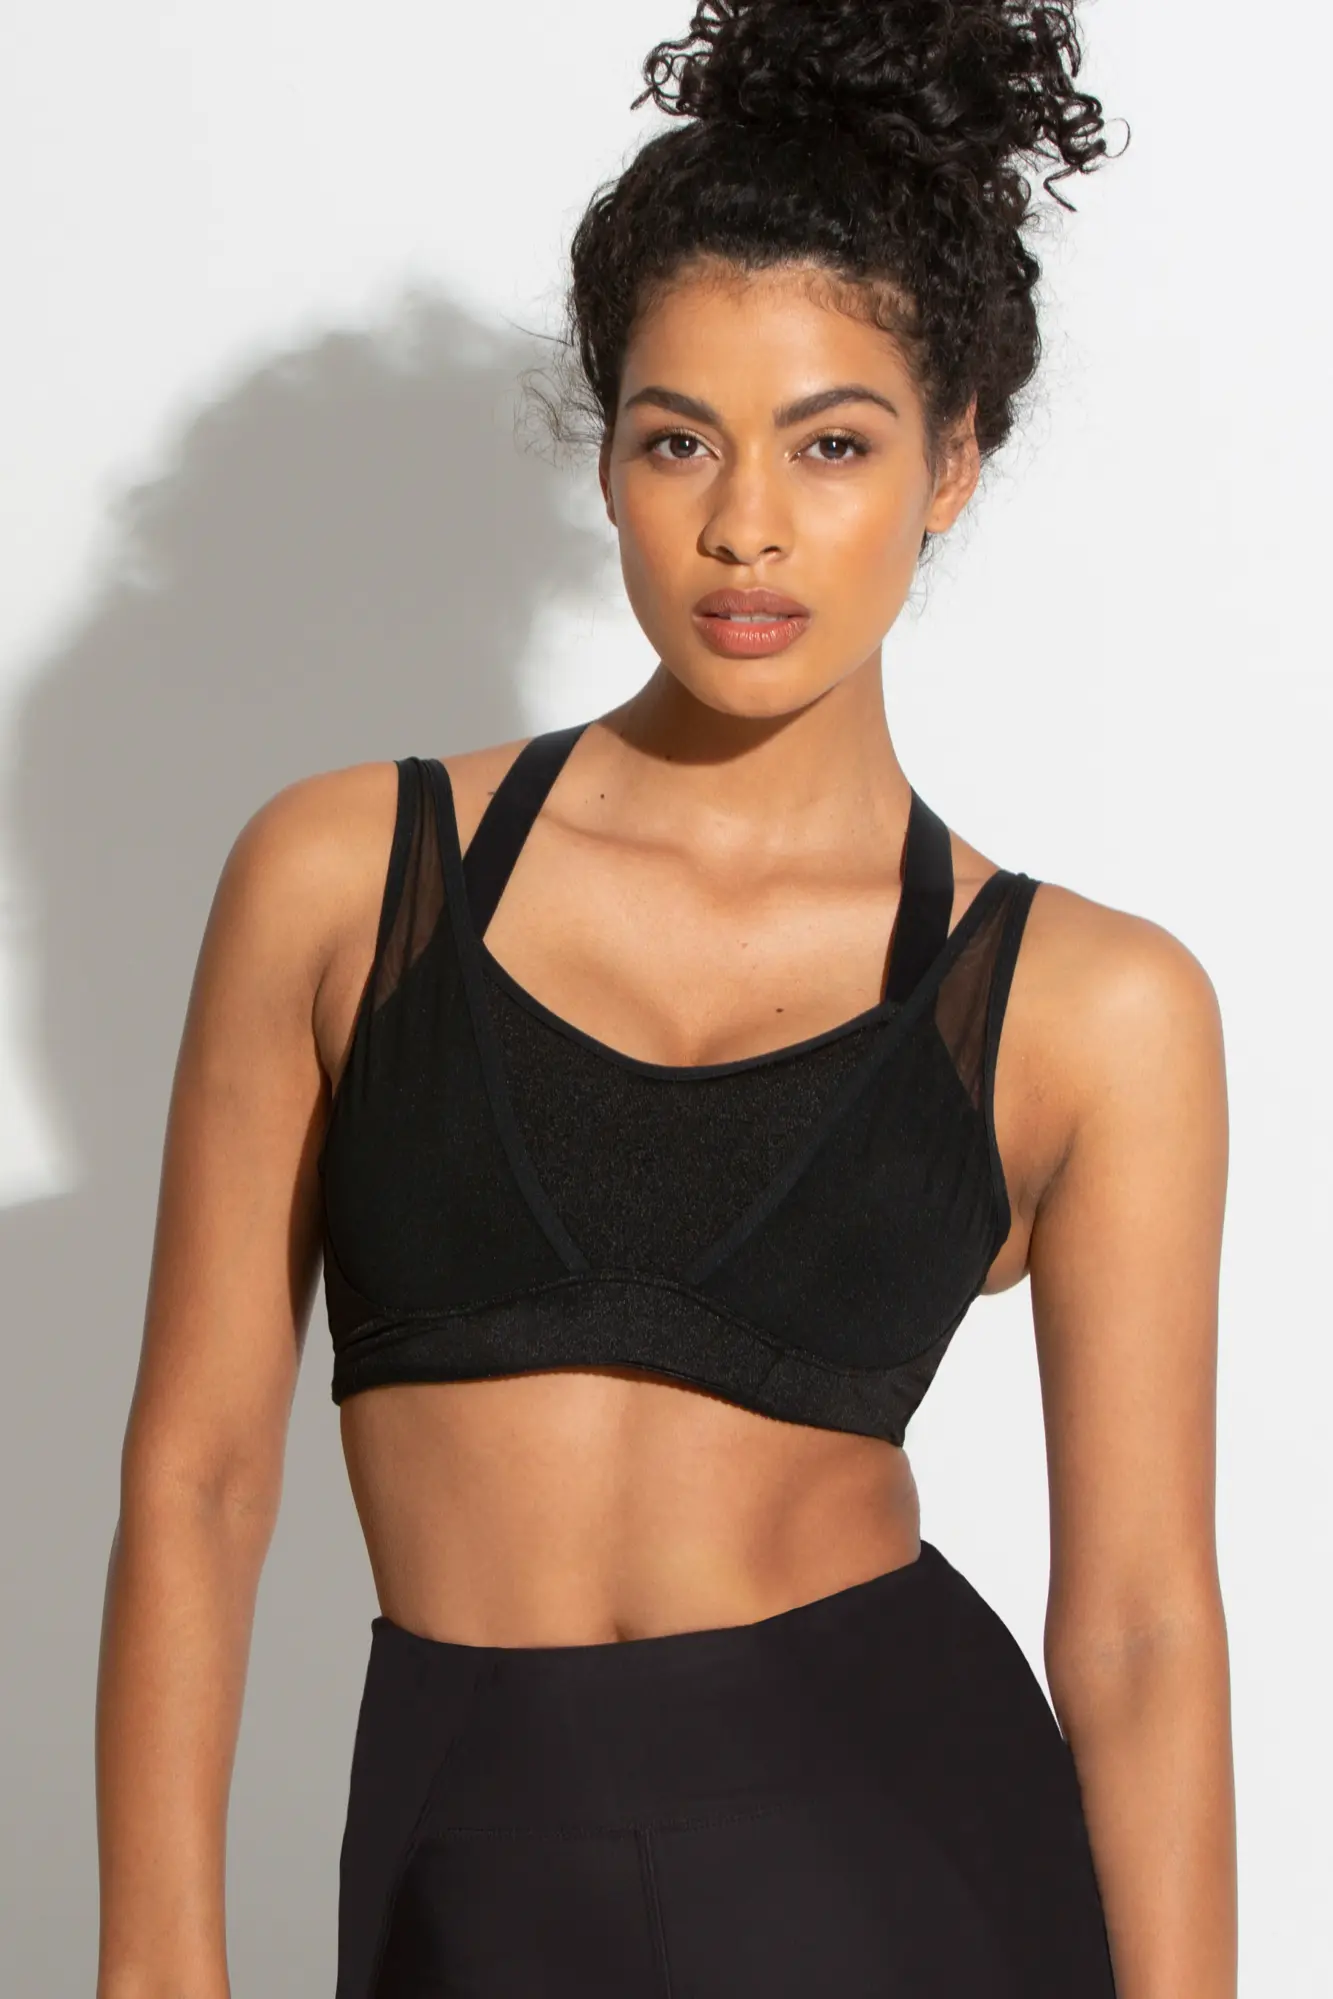 How To Find The Perfect Fitting Sports Bra!